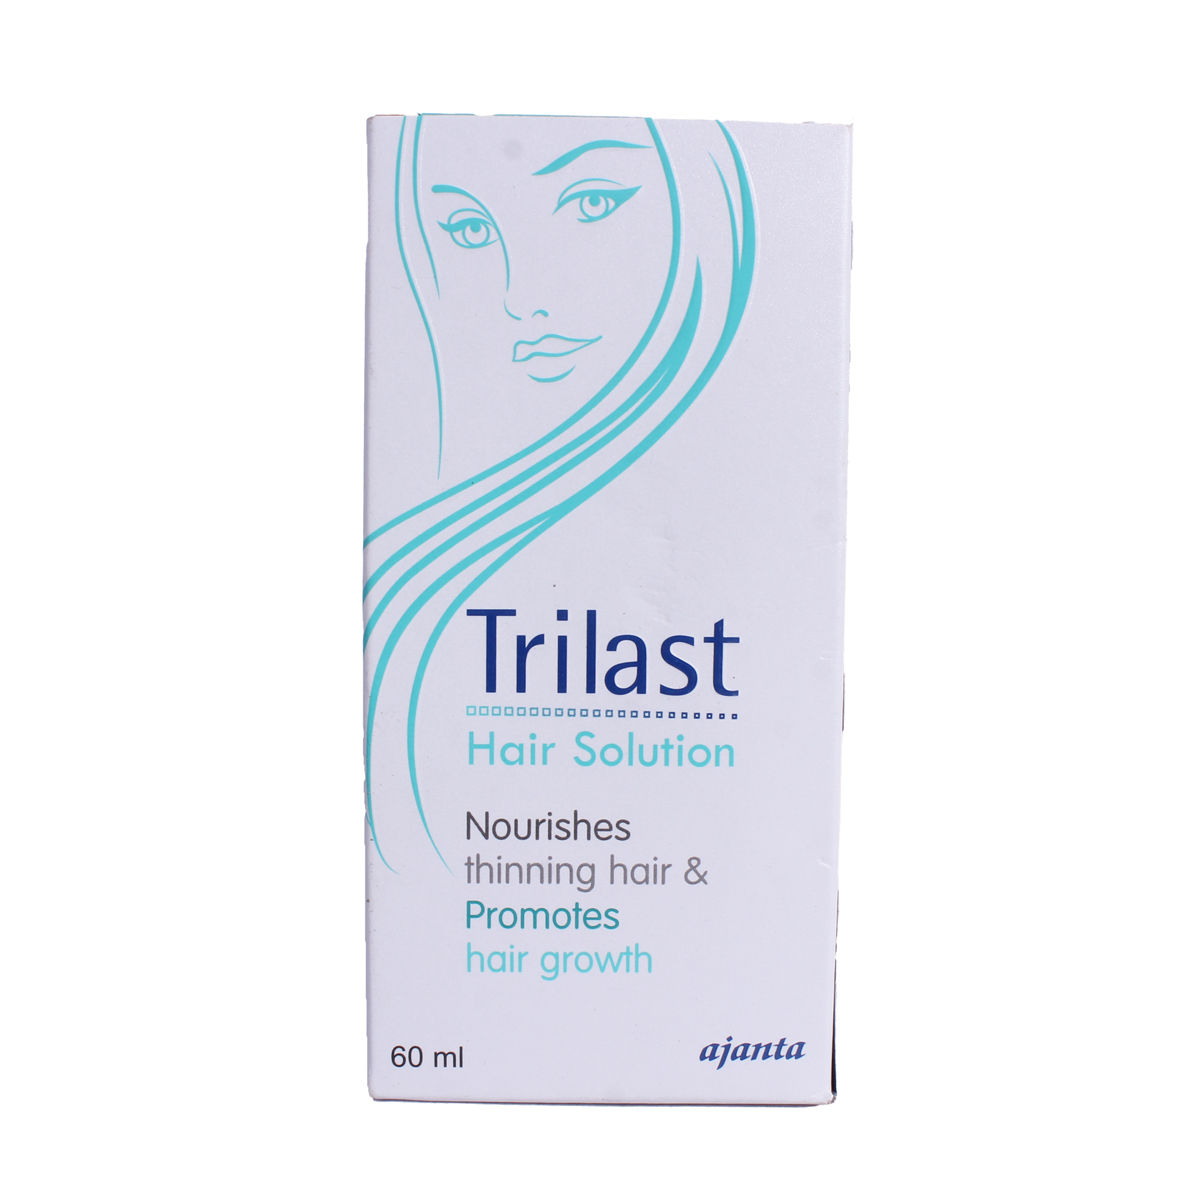 Trilast Hair Solution,60 ml Price, Uses, Side Effects, Composition - Apollo  Pharmacy